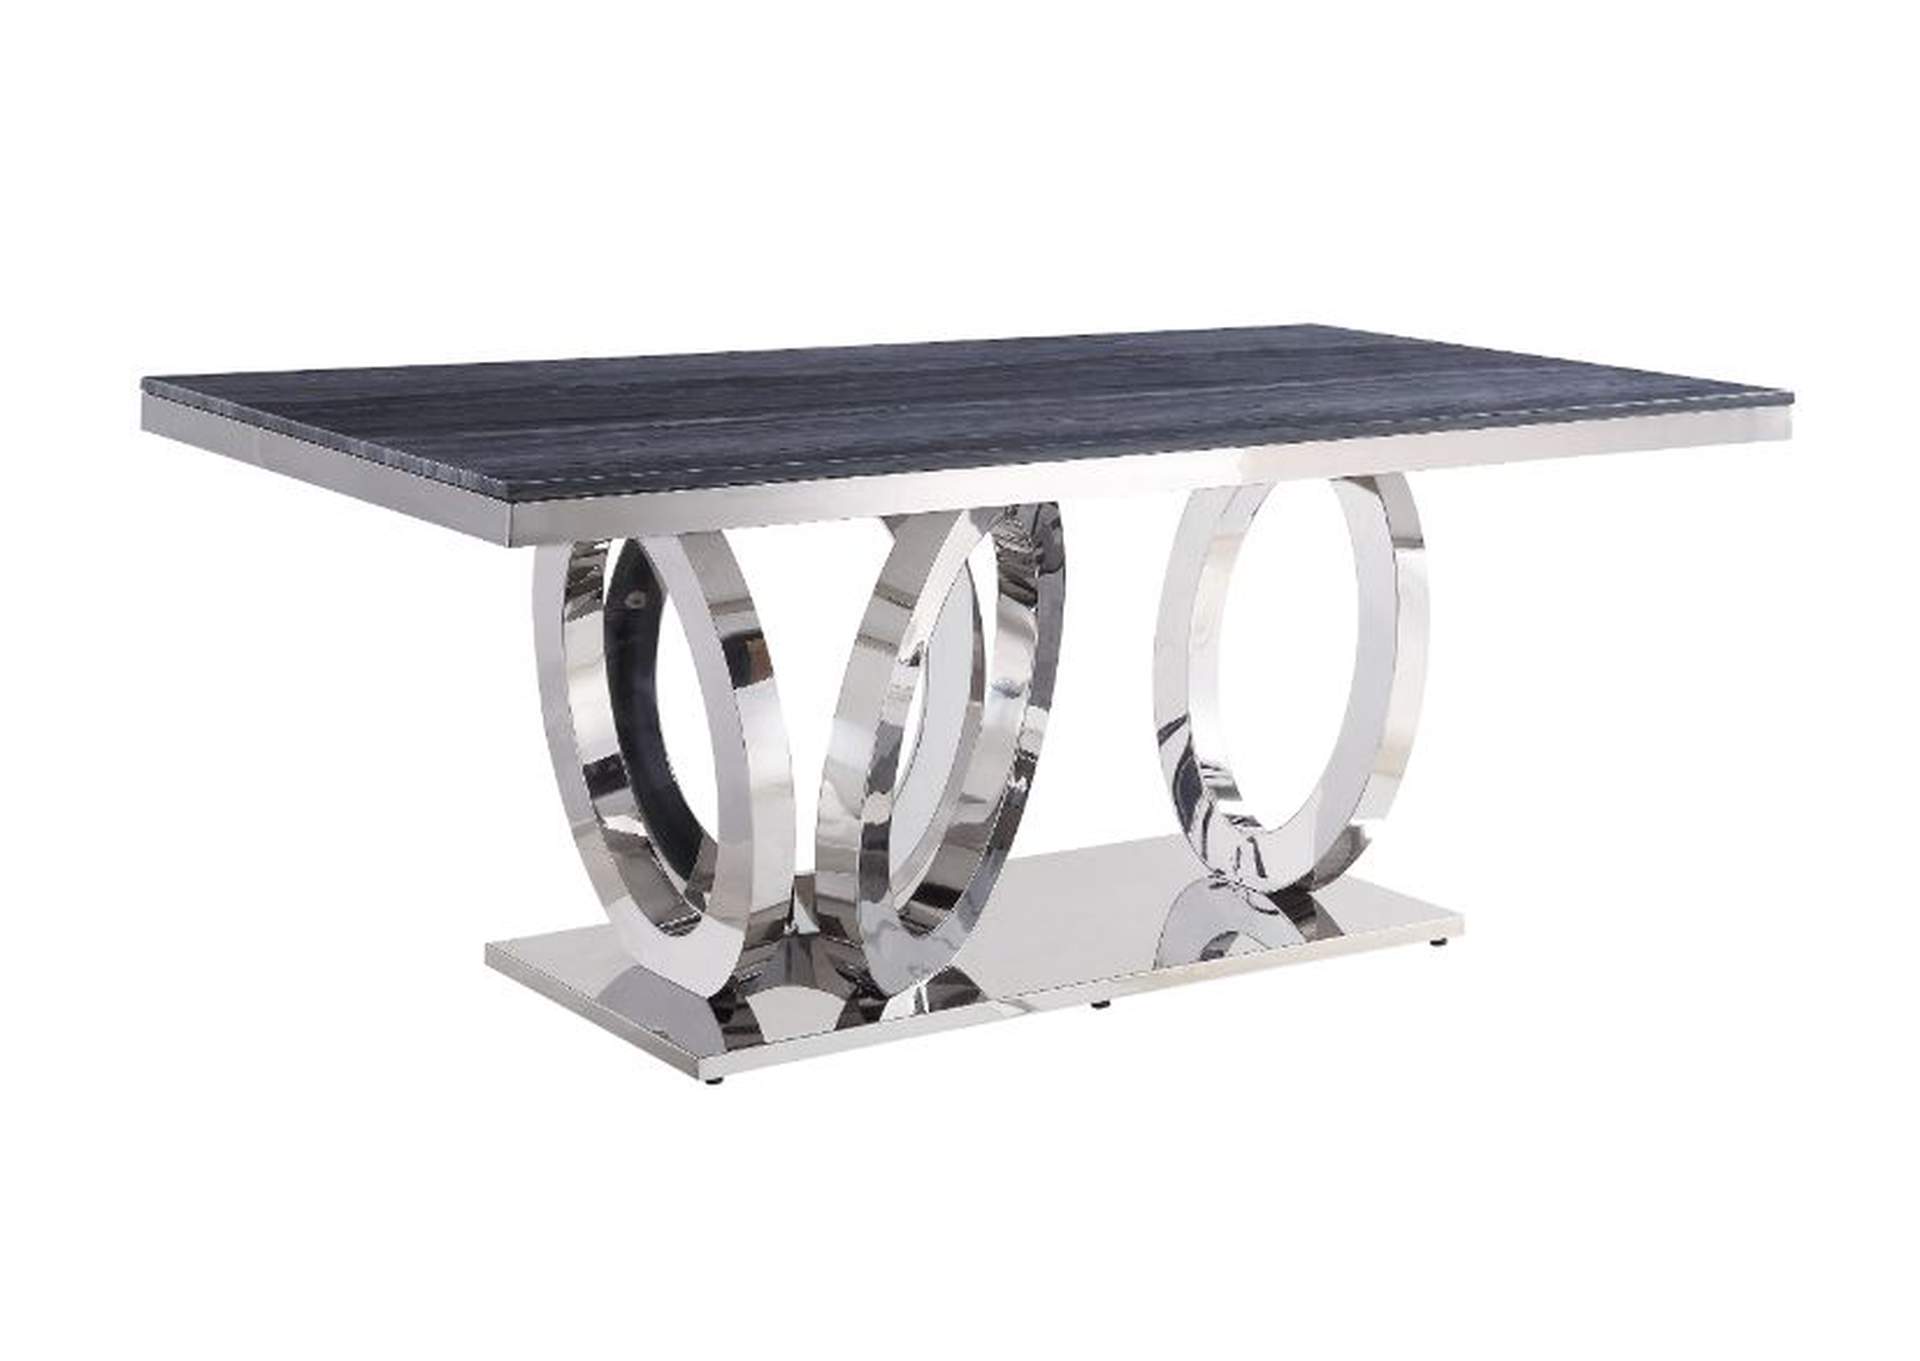 Nasir Gray Printed Faux Marble & Mirrored Silver Finish Dining Table,Acme